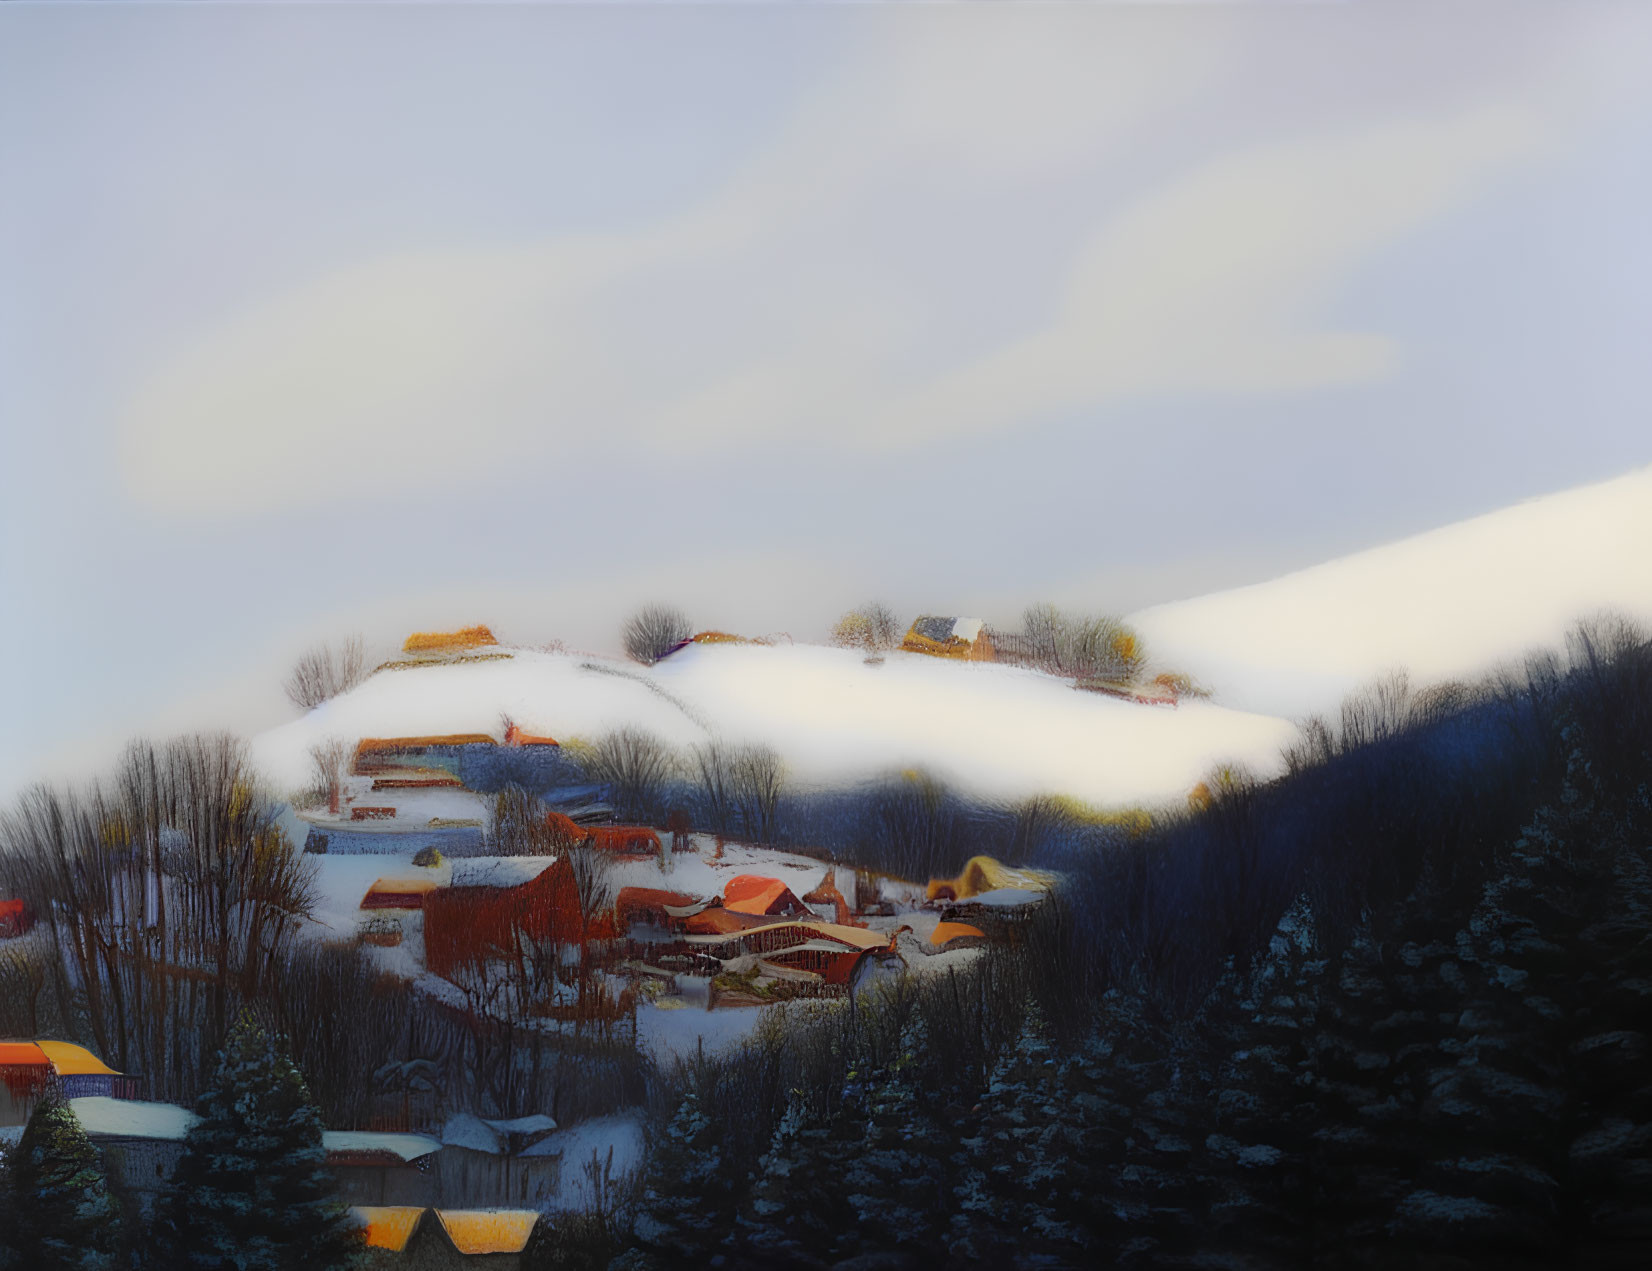 Snow-covered hills with warmly lit houses in winter landscape